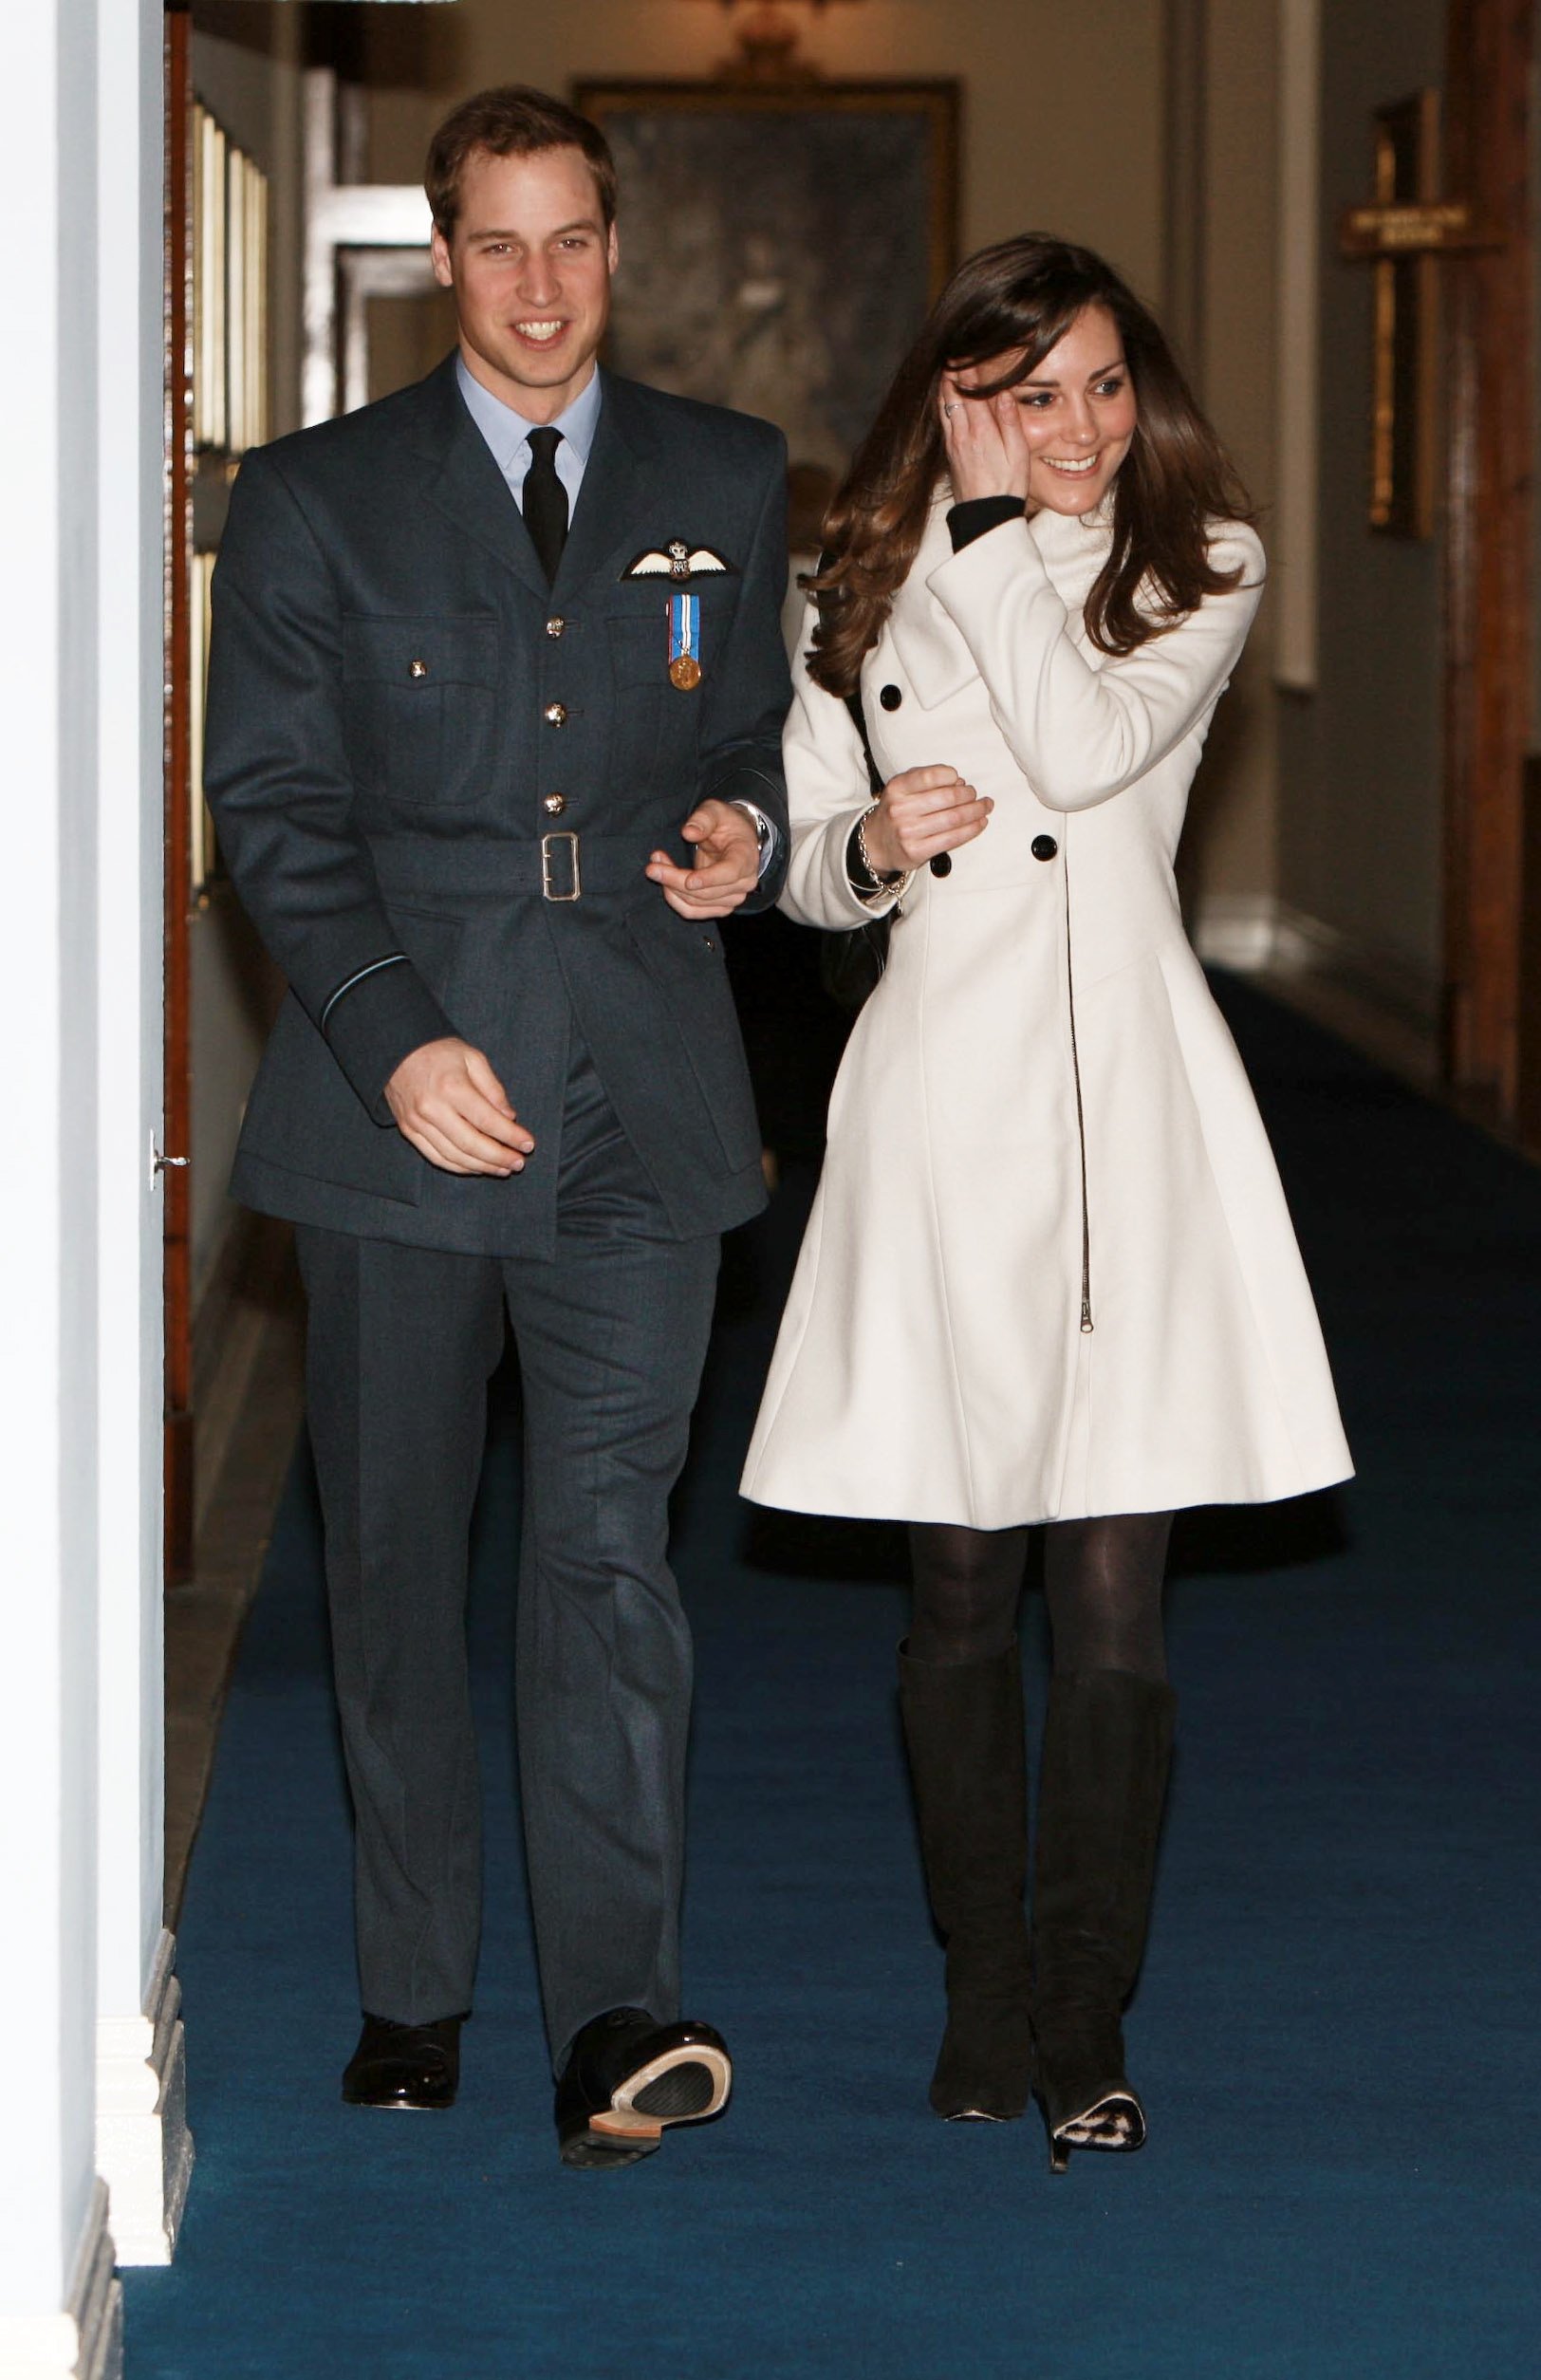 Prince William and his girlfriend Kate Middleton at the Central Flying School at RAF Cranwell where Prince William received his RAF wings in a graduation ceremony, Sleaford on April 11, 2008 in Lincolnshire, England | Source: Getty Images